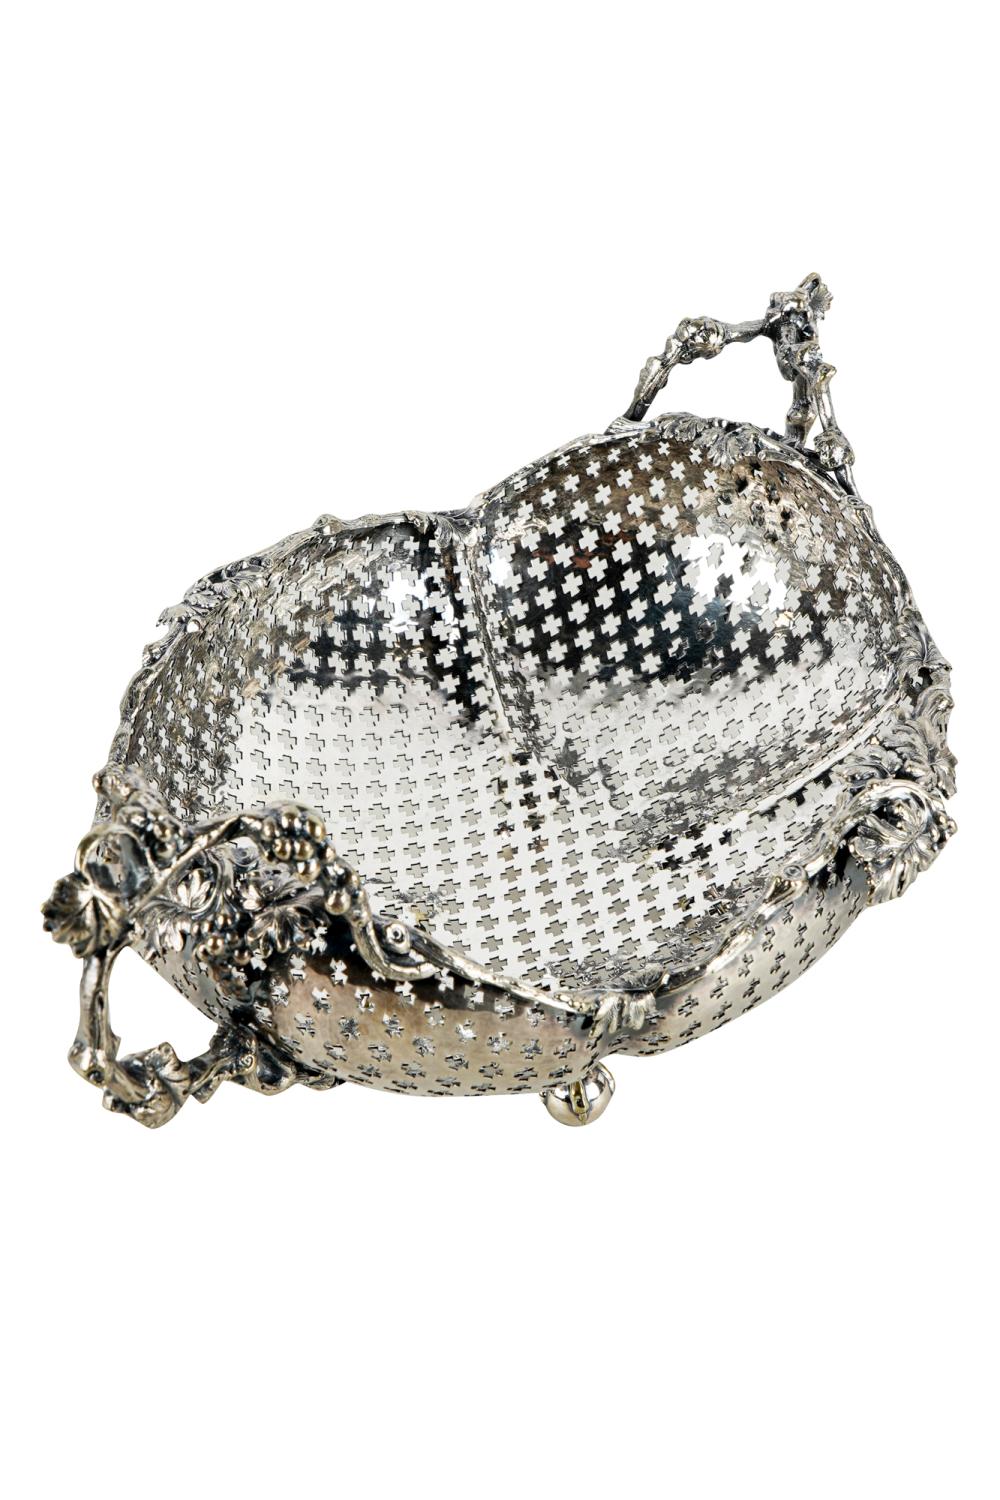 SILVER-PLATE TWO-HANDLED BASKETwith